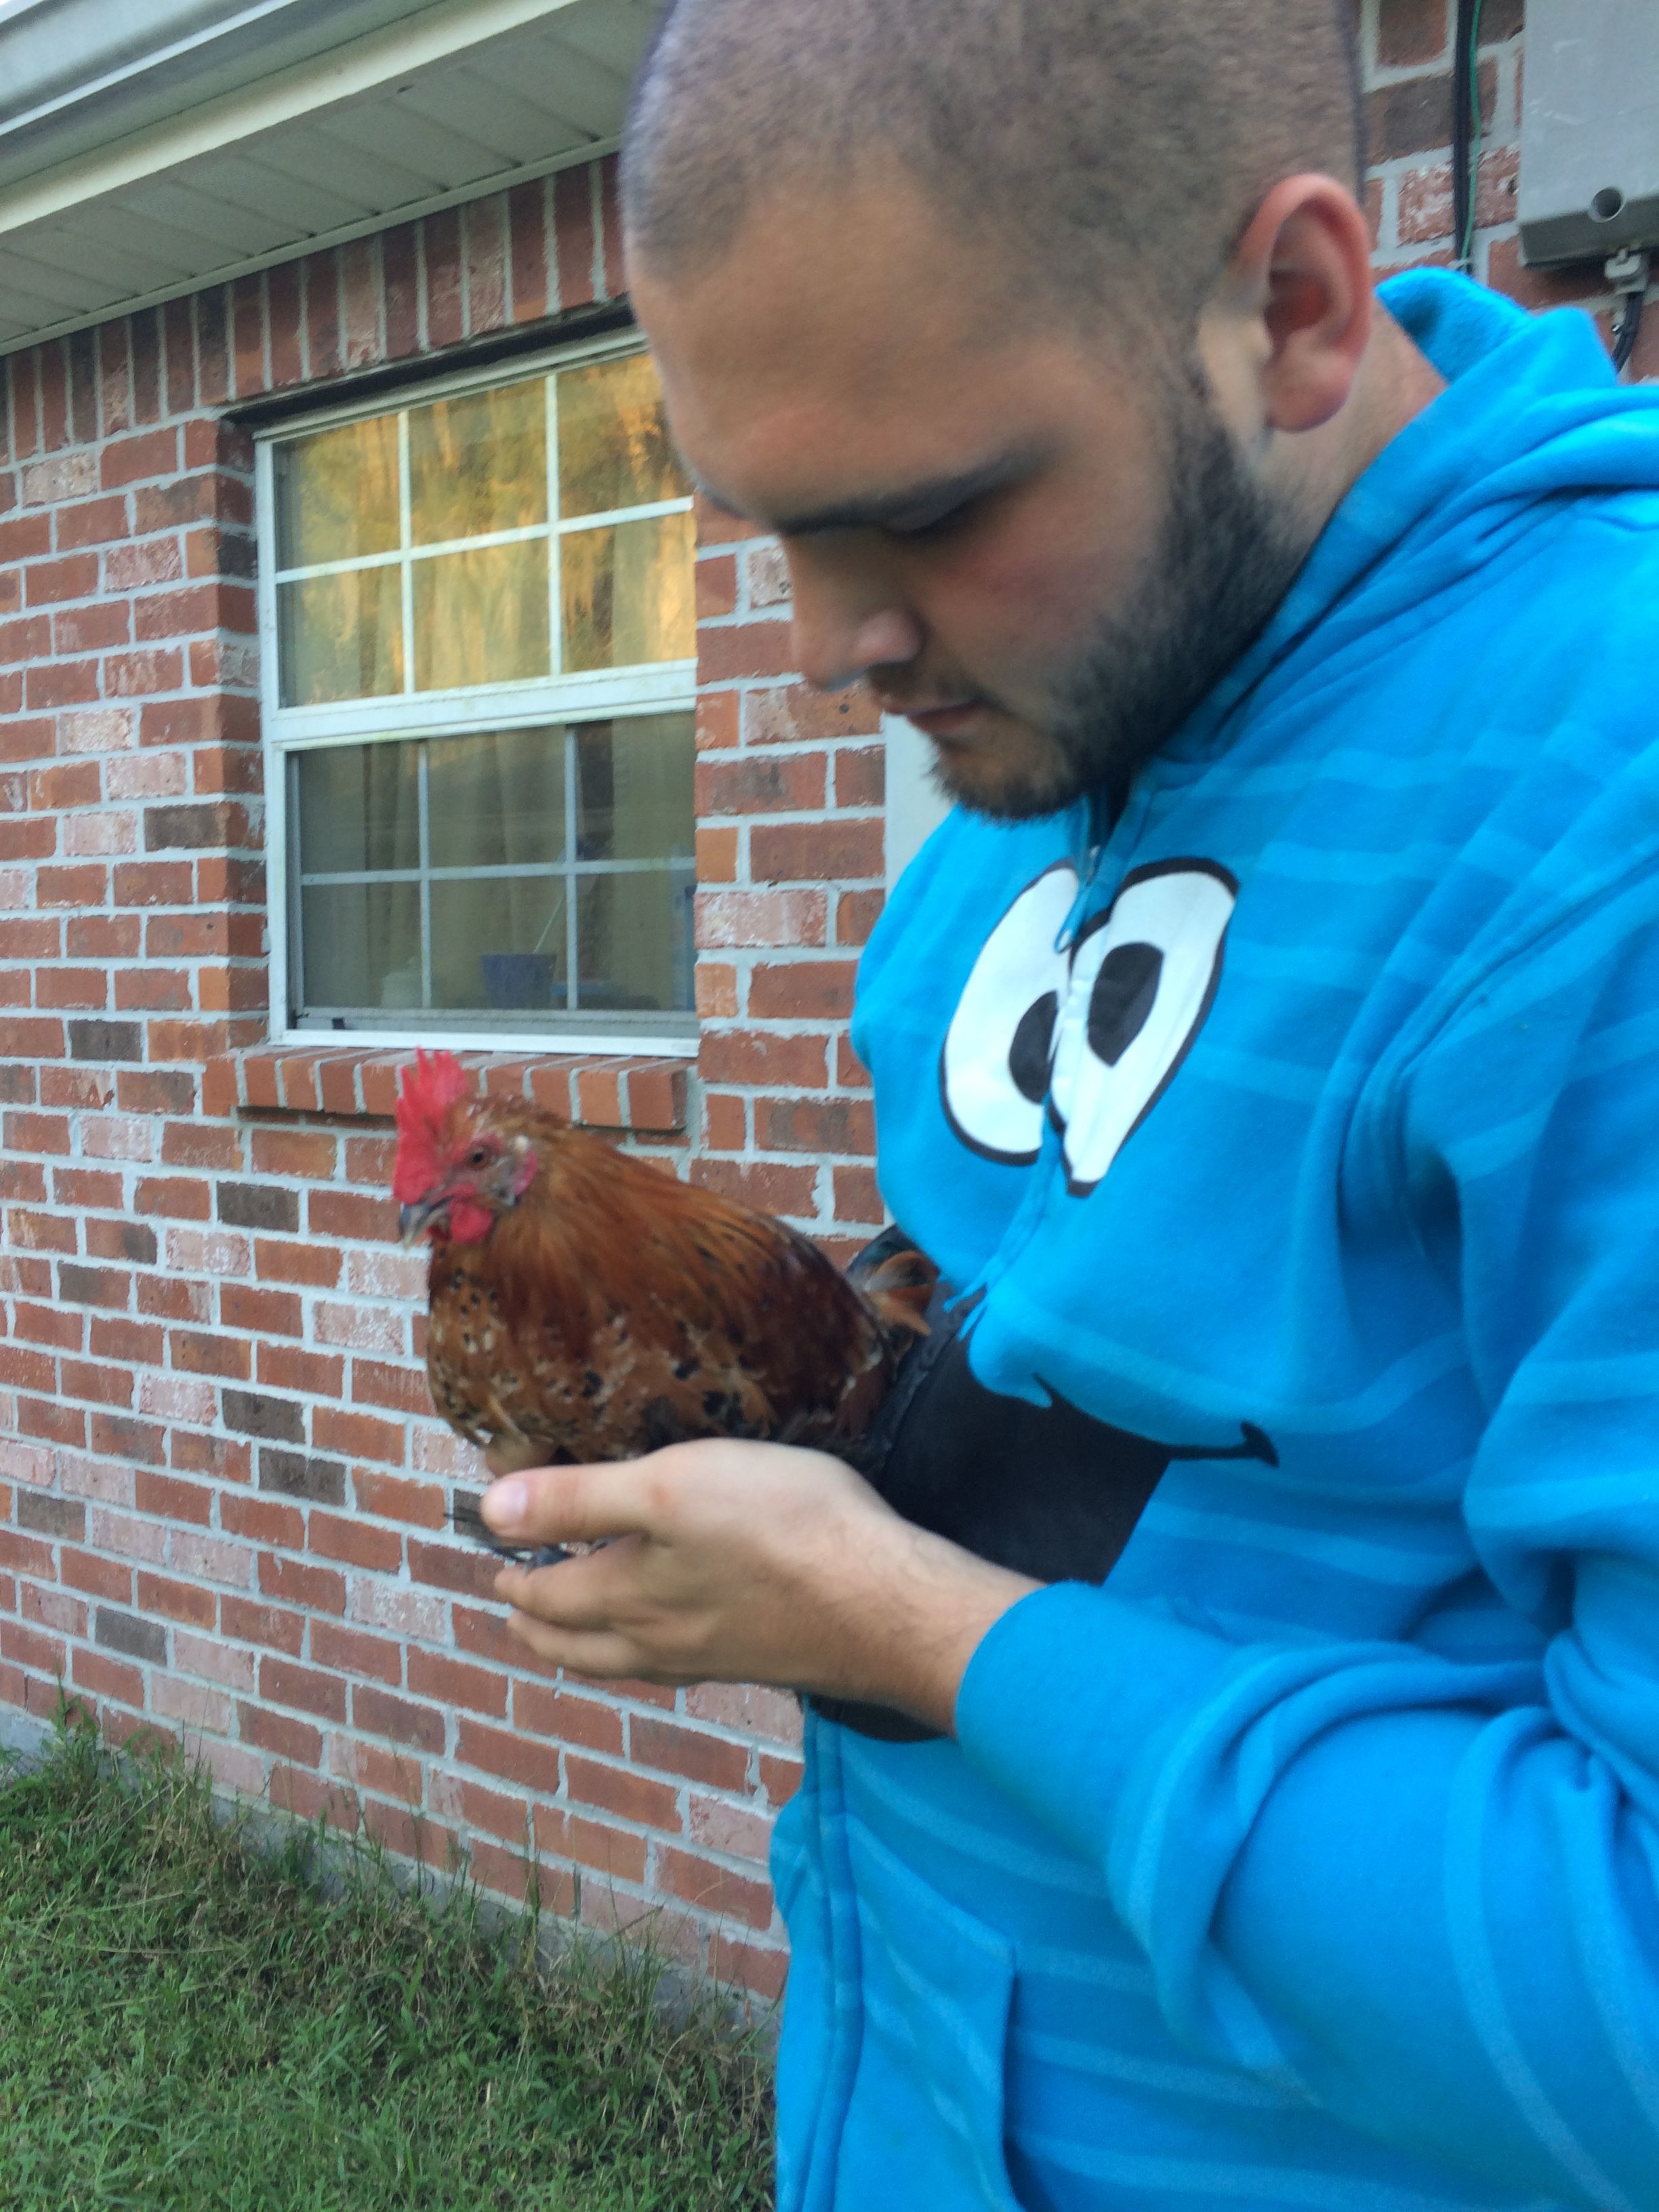 Jerry the chicken whisperer!